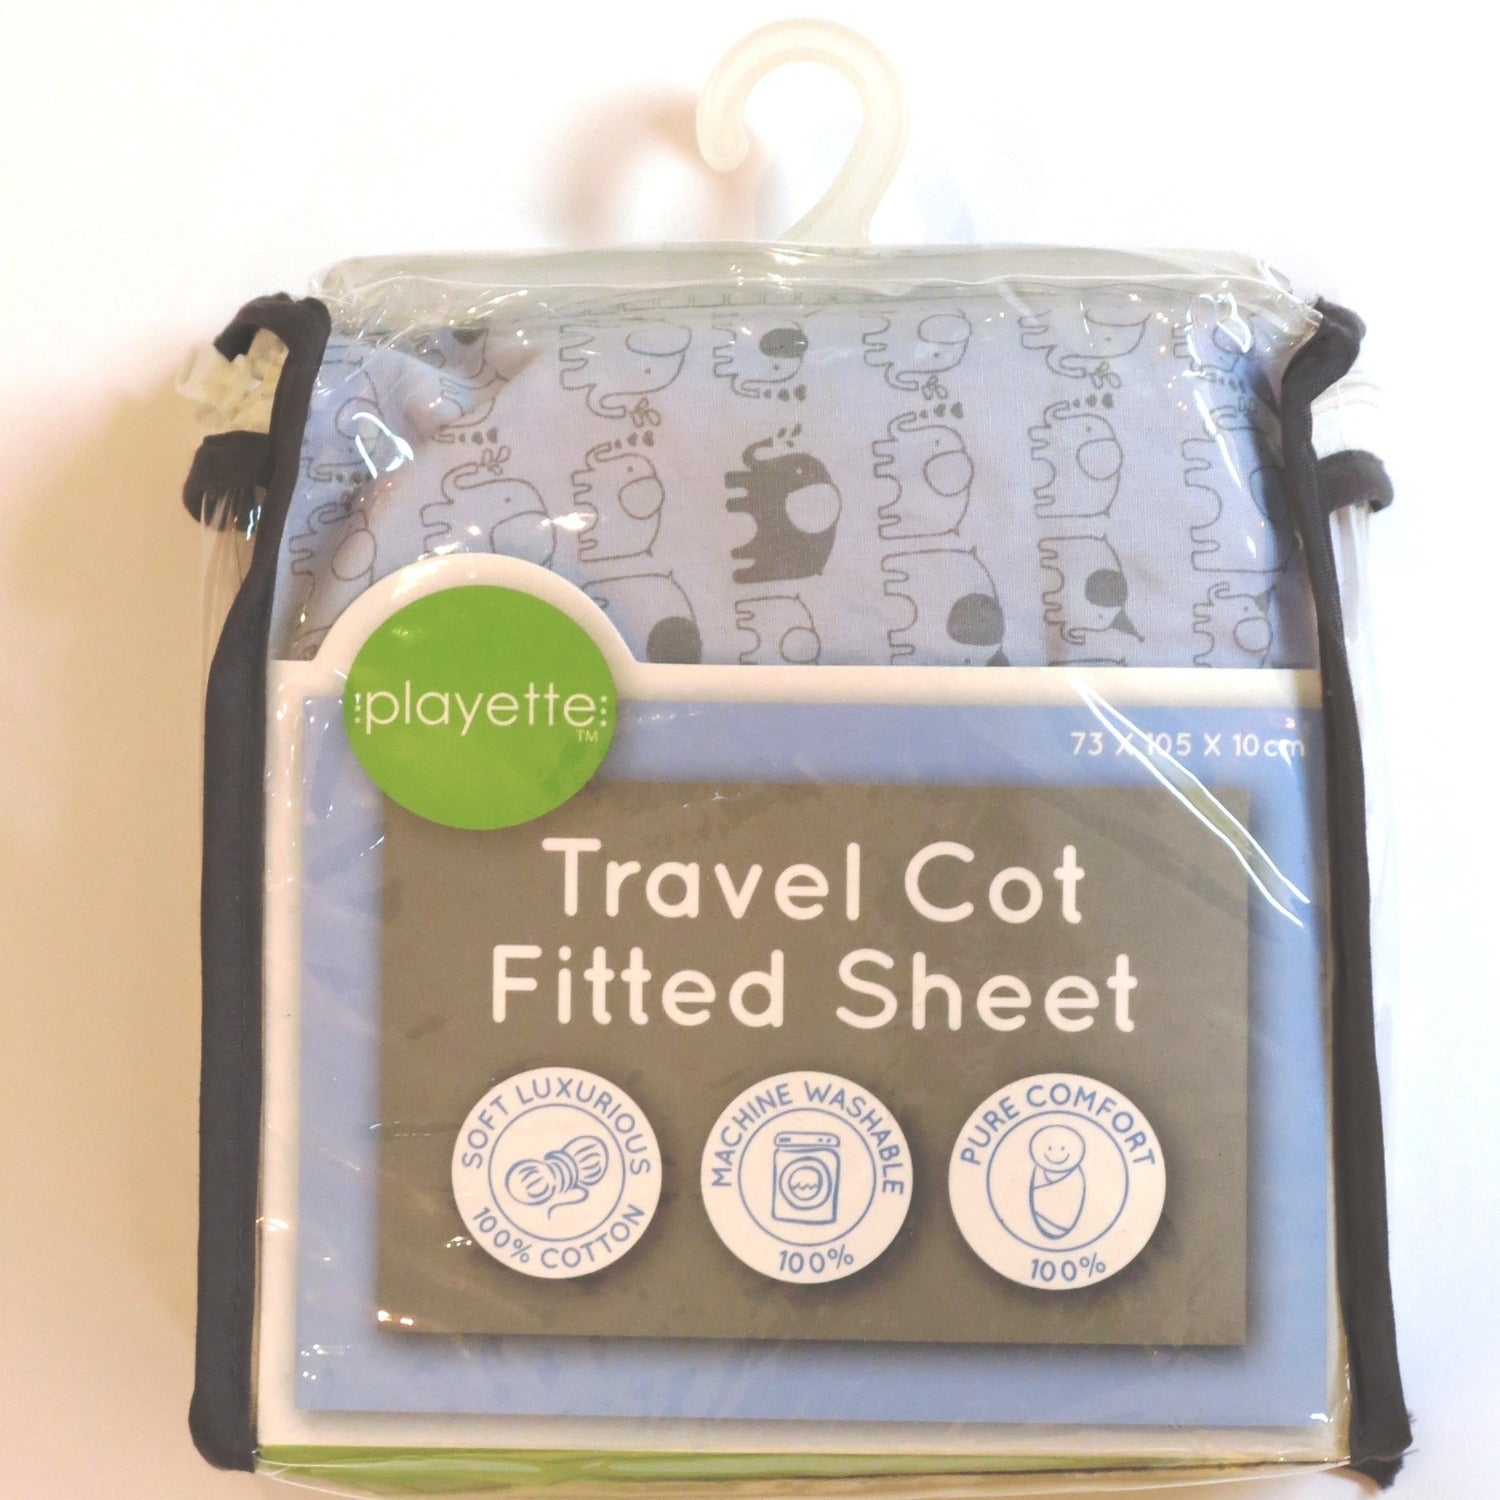 Playette Travel Cot Fitted Sheet - Blue, Printed Elephants